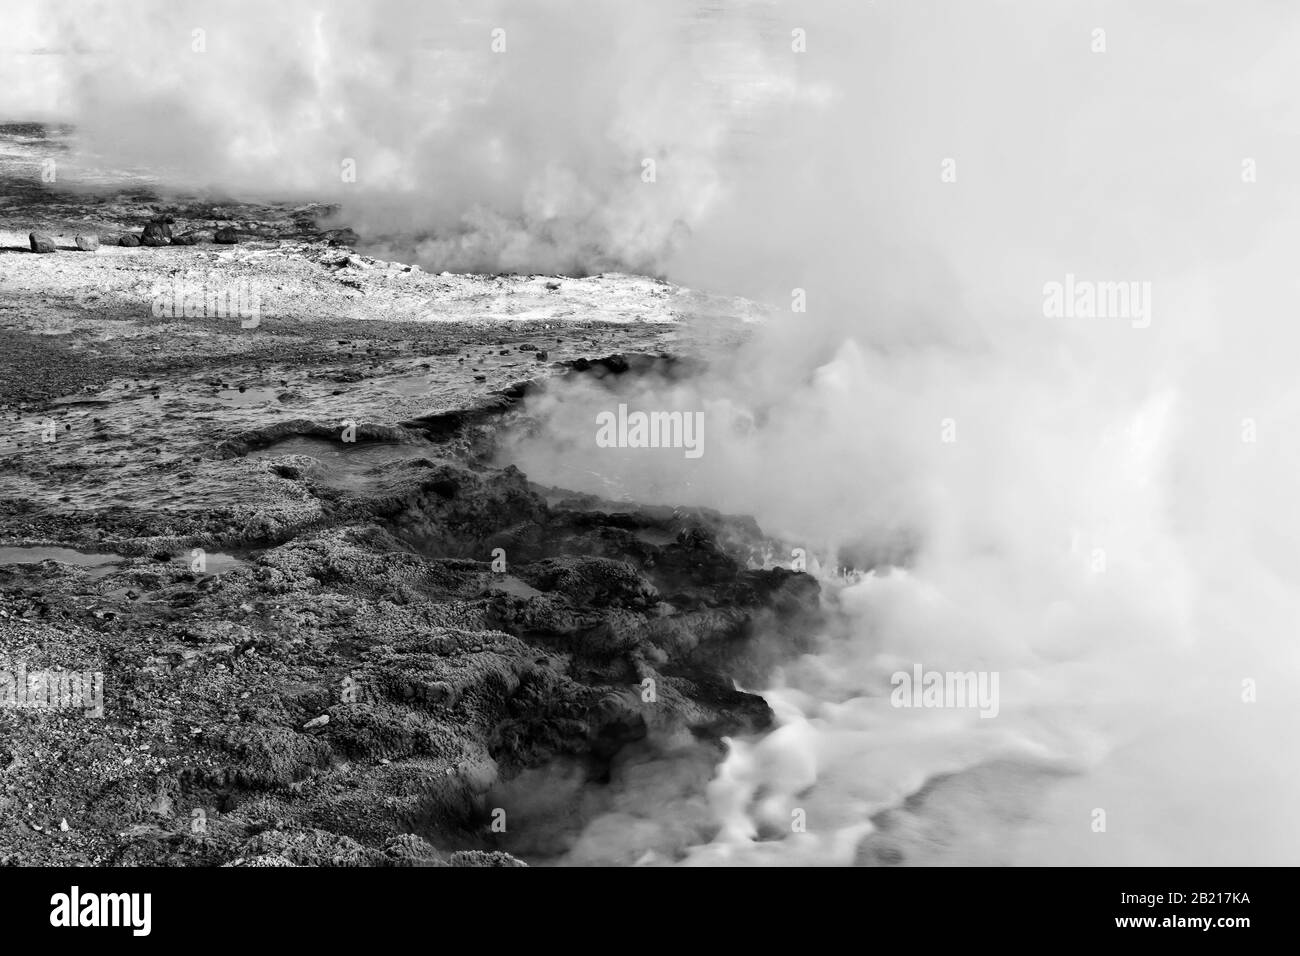 Close-up view of steam from boiling geyser, El Tatio Geyser Field, Andes Mountains, Altiplano, Atacama Desert Antofagasta, Chile, black and white Stock Photo